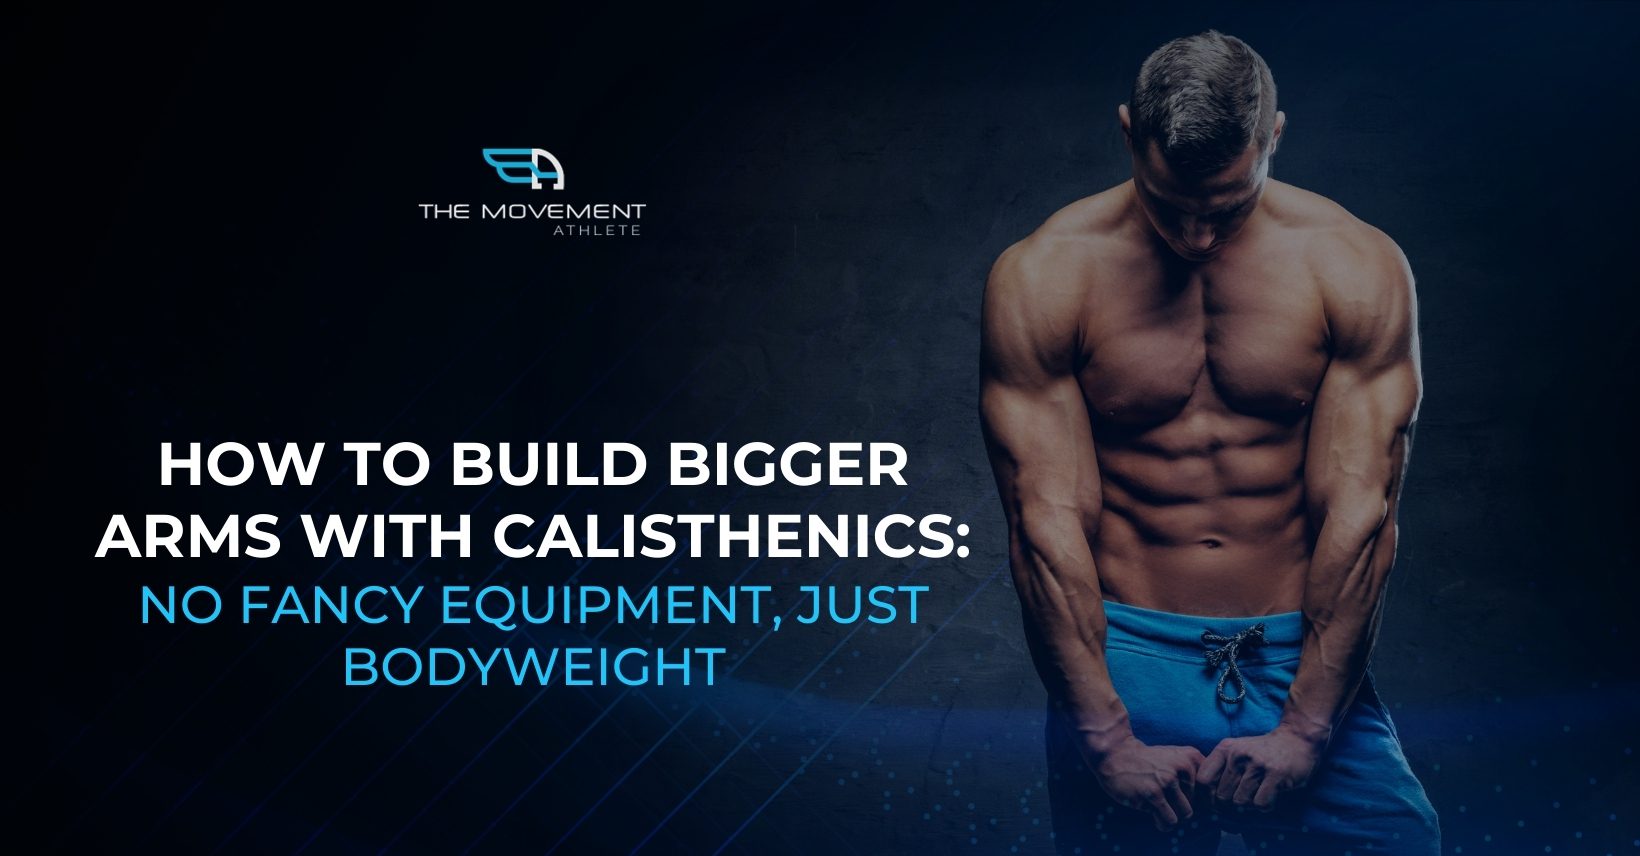 How To Build Bigger Arms With Calisthenics: No Fancy Equipment